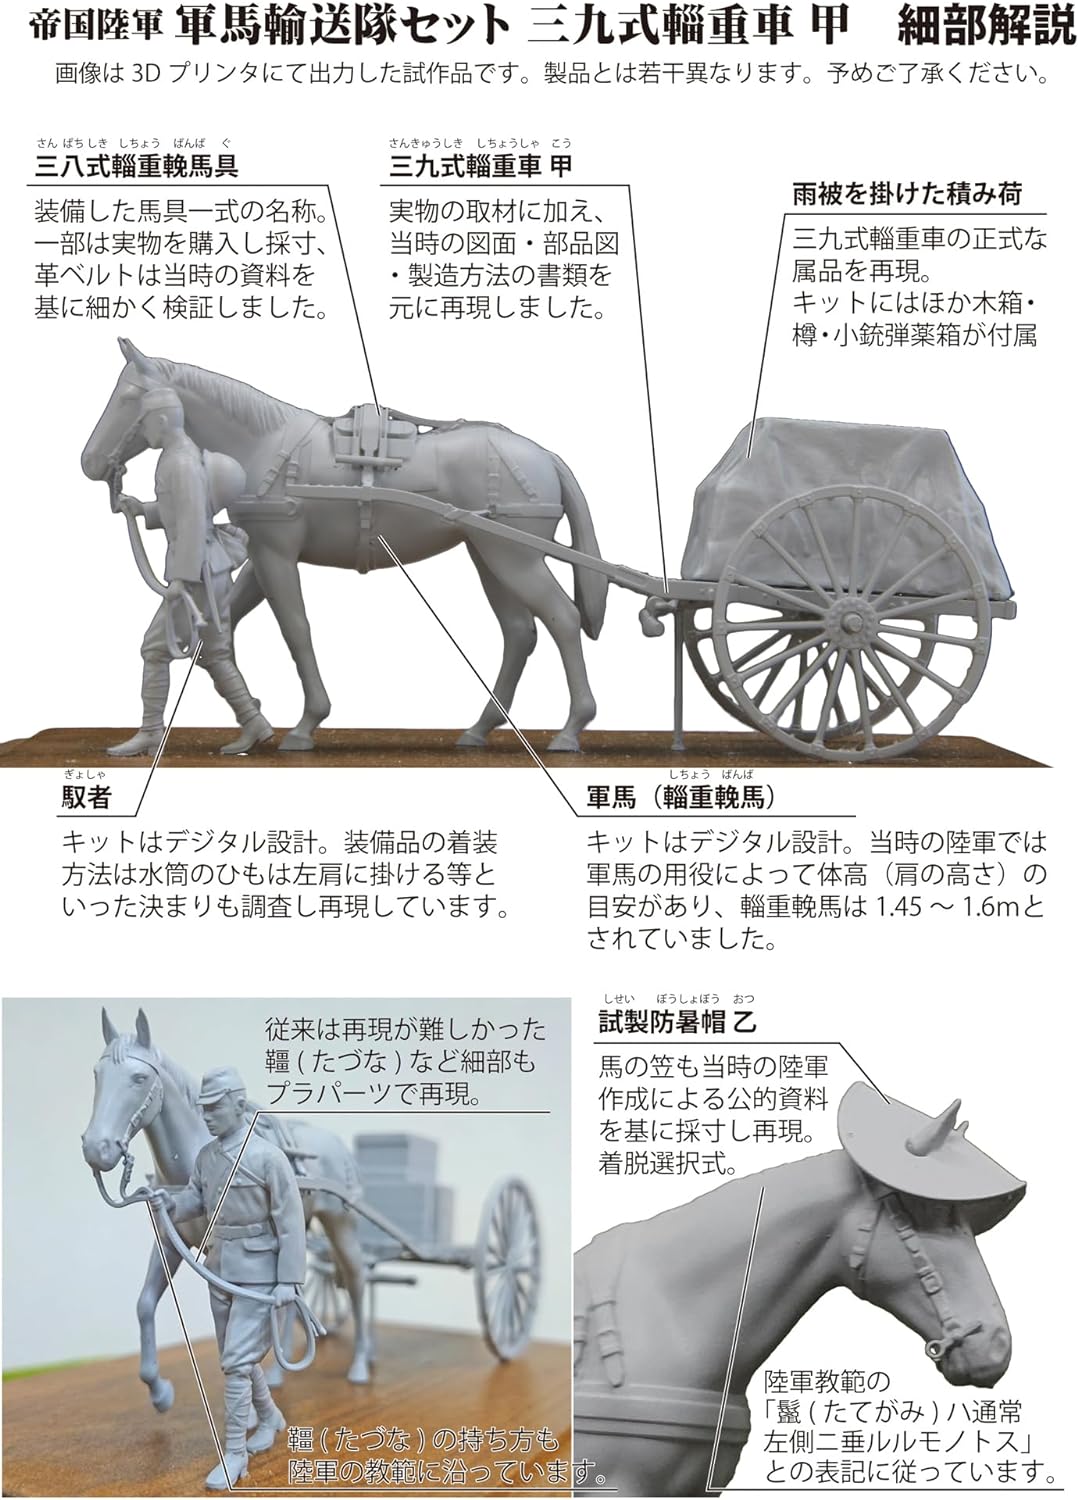 Fine Mold FM60 1/35 Military Series Imperial Army Warhorse Transportation Set of 39 Heavy Vehicles Instep - BanzaiHobby